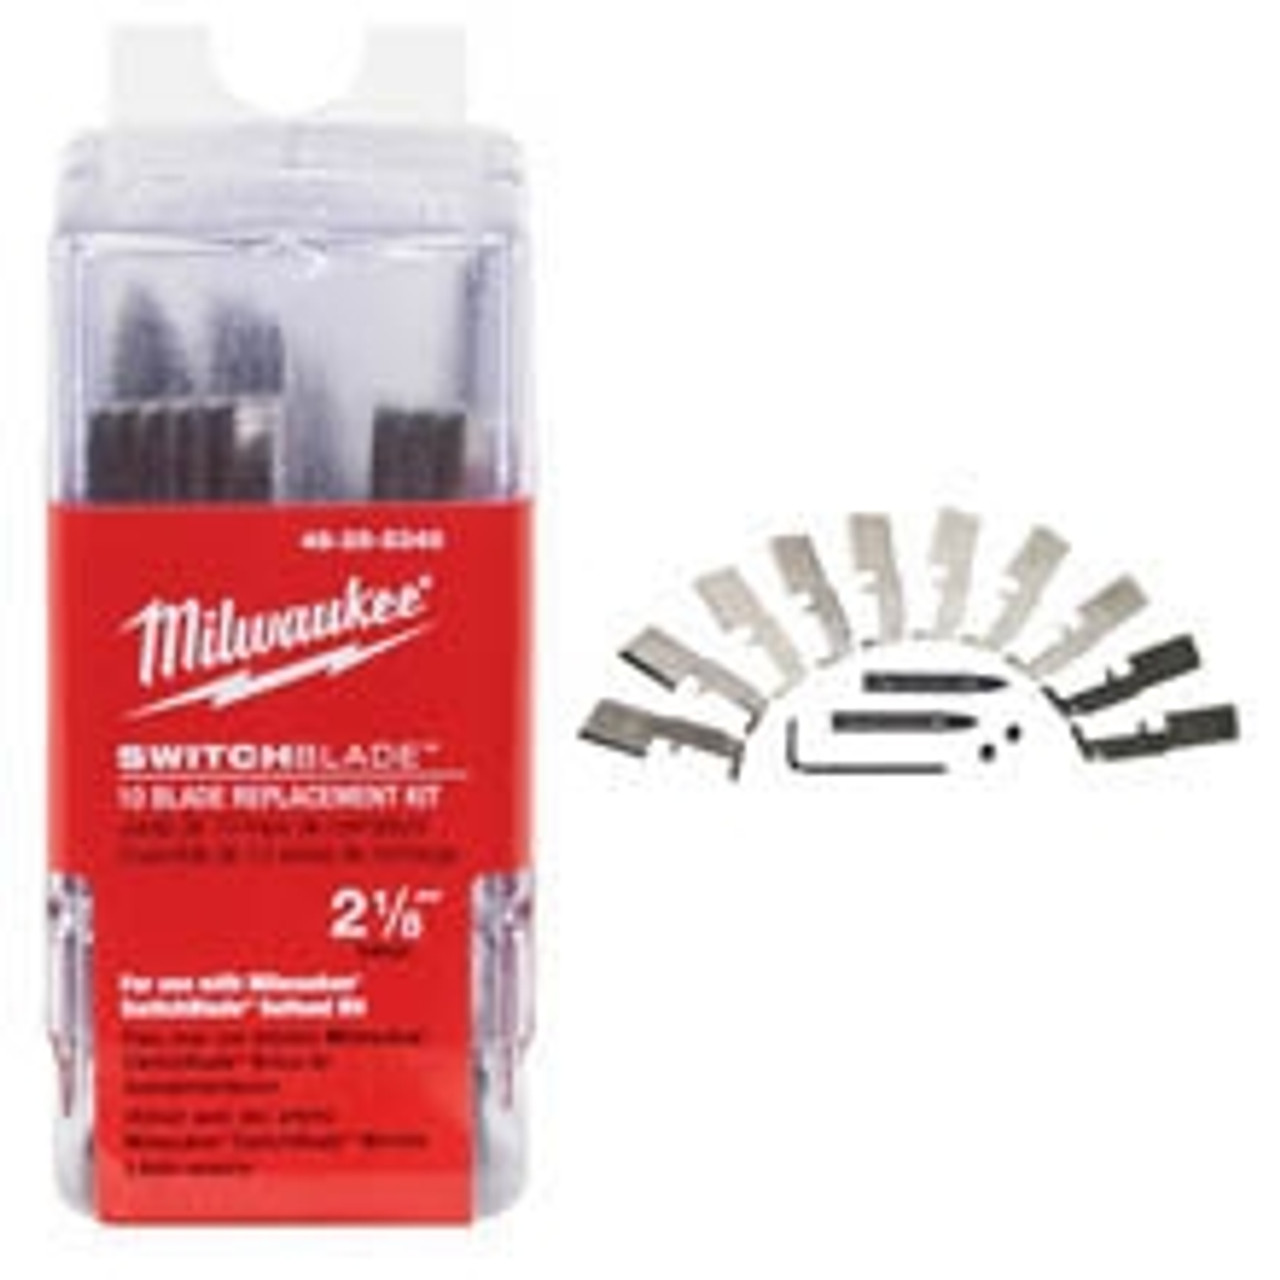 Milwaukee 48-25-5350 2-9/16 in. Switchblade 10 Blade Replacement Kit